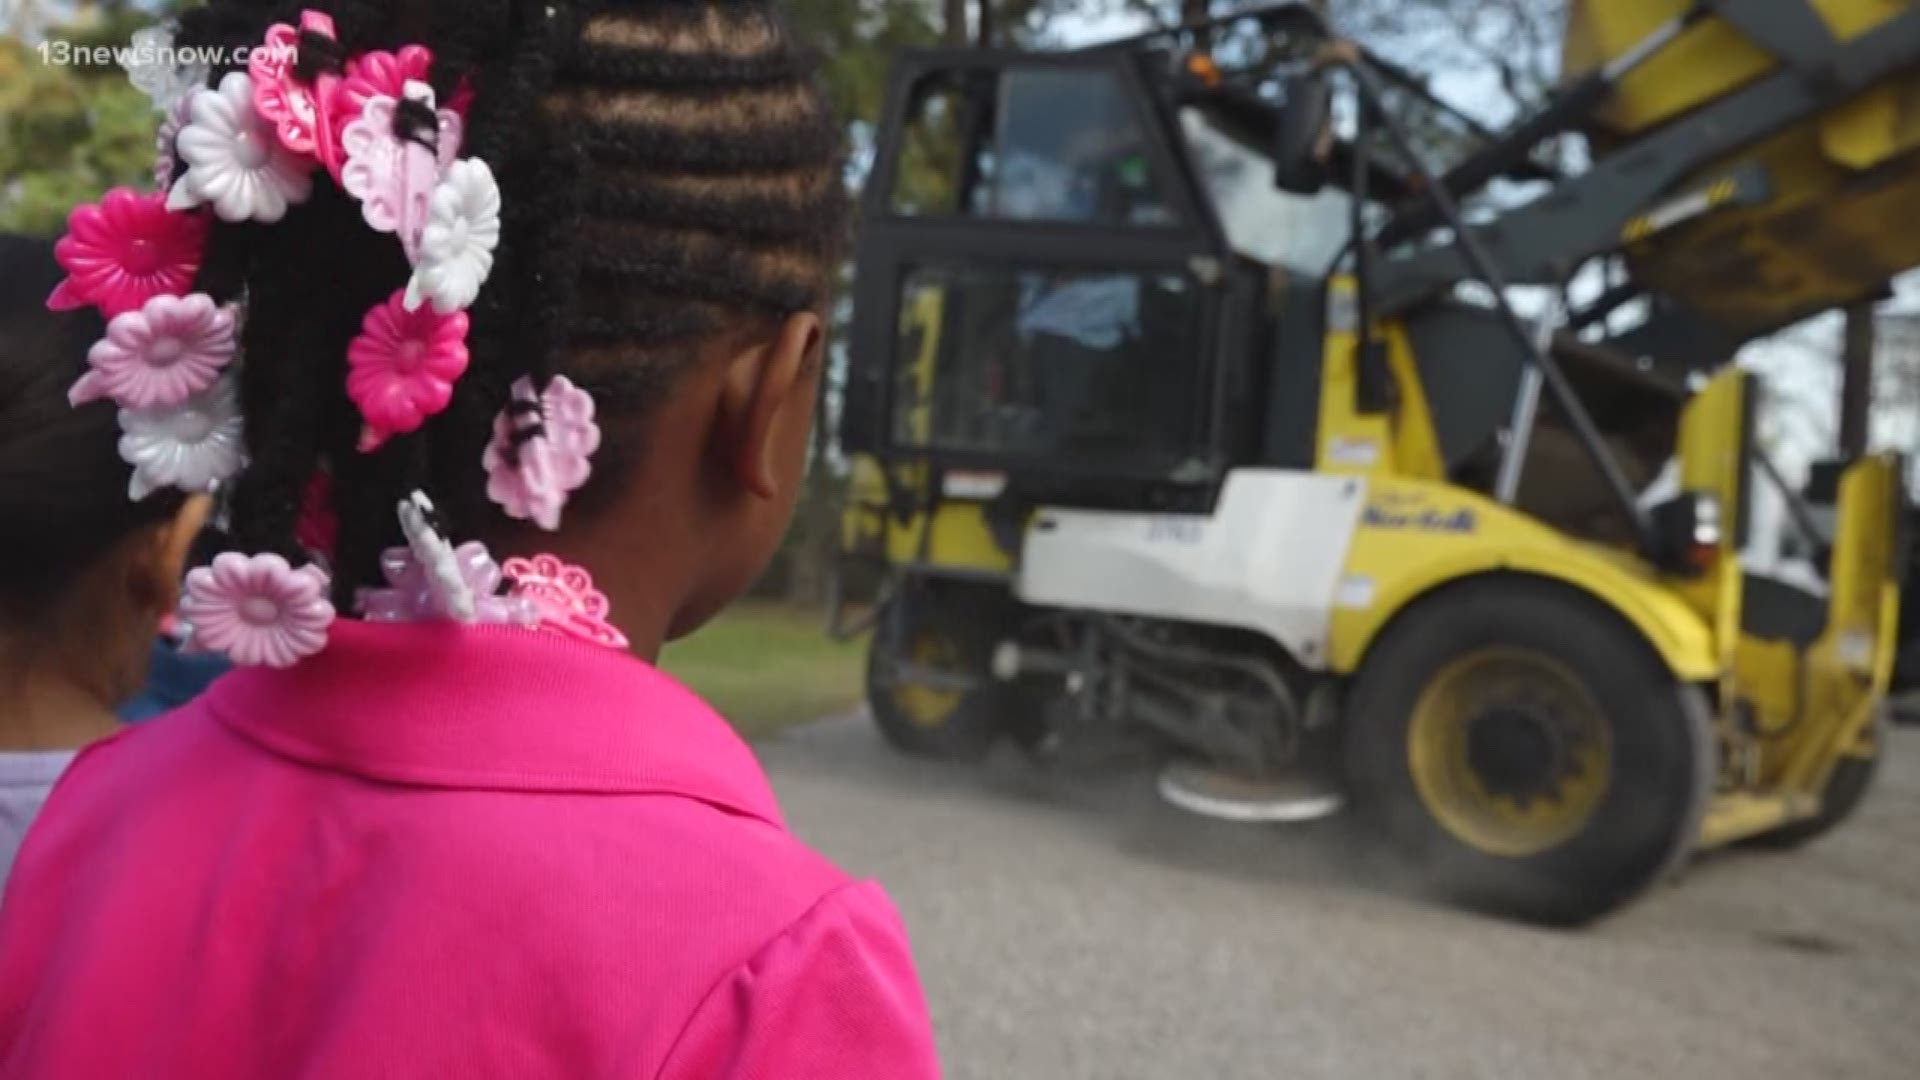 A Norfolk street sweeper is trying to inspire students Granby Elementary School to help keep their city clean.